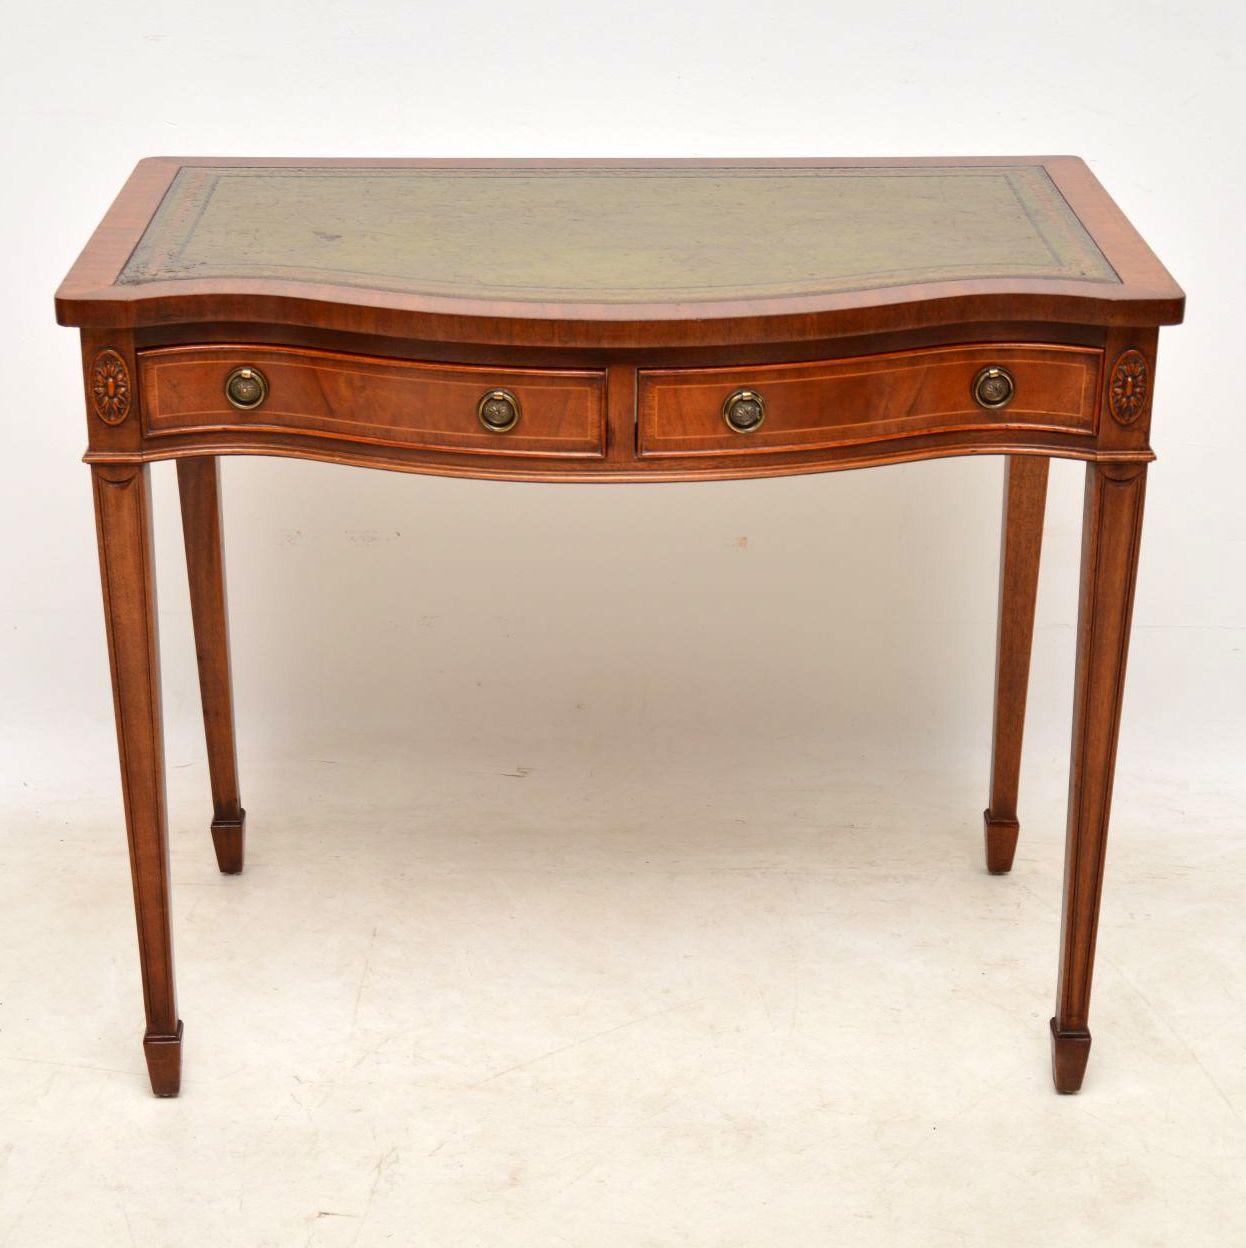 Antique Sheraton style leather top writing table in good condition dating from the 1950s period. It has a nice character original tooled leather writing surface. The front is serpentine shaped and there are two drawers with inlay, cross banding and